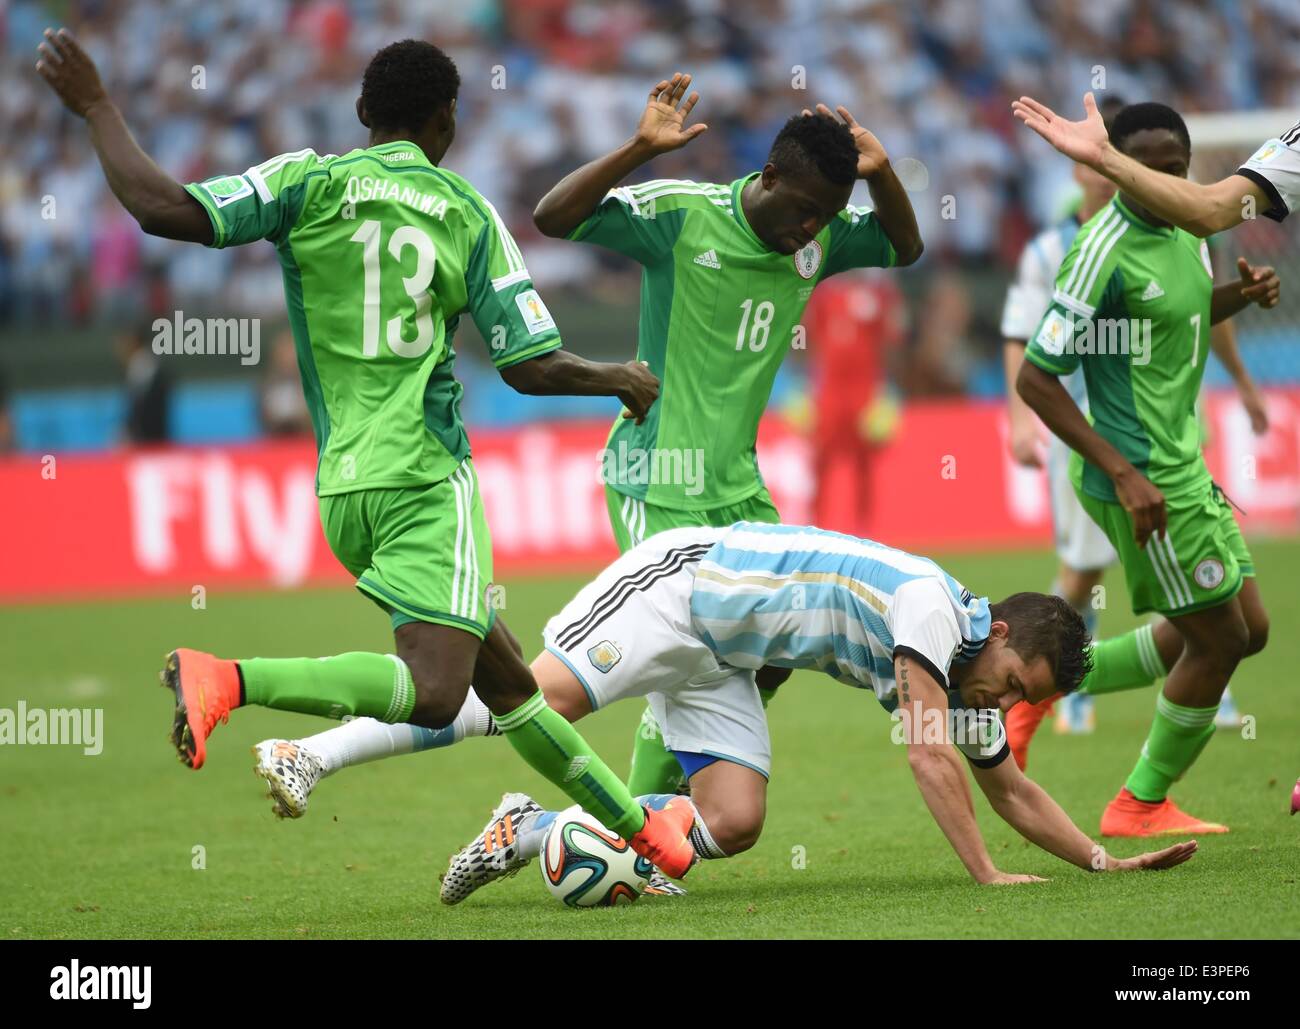 Porto Alegre, Brazil. 25th June, 2014. Argentina's Federico Fernandez (bottom) falls down in a competition with Nigeria's players during a Group F match between Nigeria and Argentina of 2014 FIFA World Cup at the Estadio Beira-Rio Stadium in Porto Alegre, Brazil, on June 25, 2014. © Li Ga/Xinhua/Alamy Live News Stock Photo